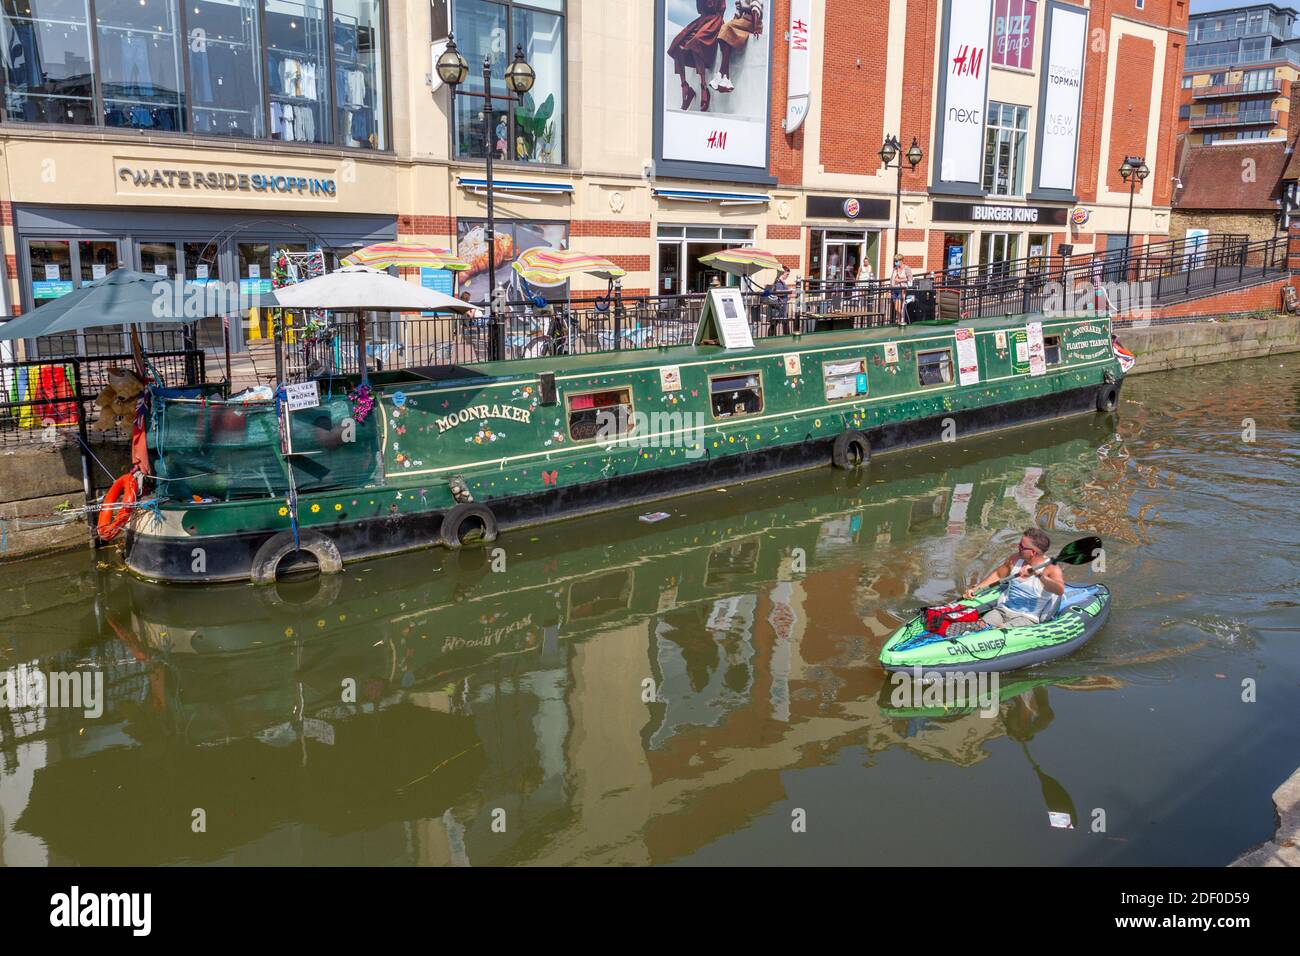 The River Witham with the Moonraker floating tearoom canal boat and a challenger kayak paddling past, Lincoln, Lincolnshire, UK. Stock Photo